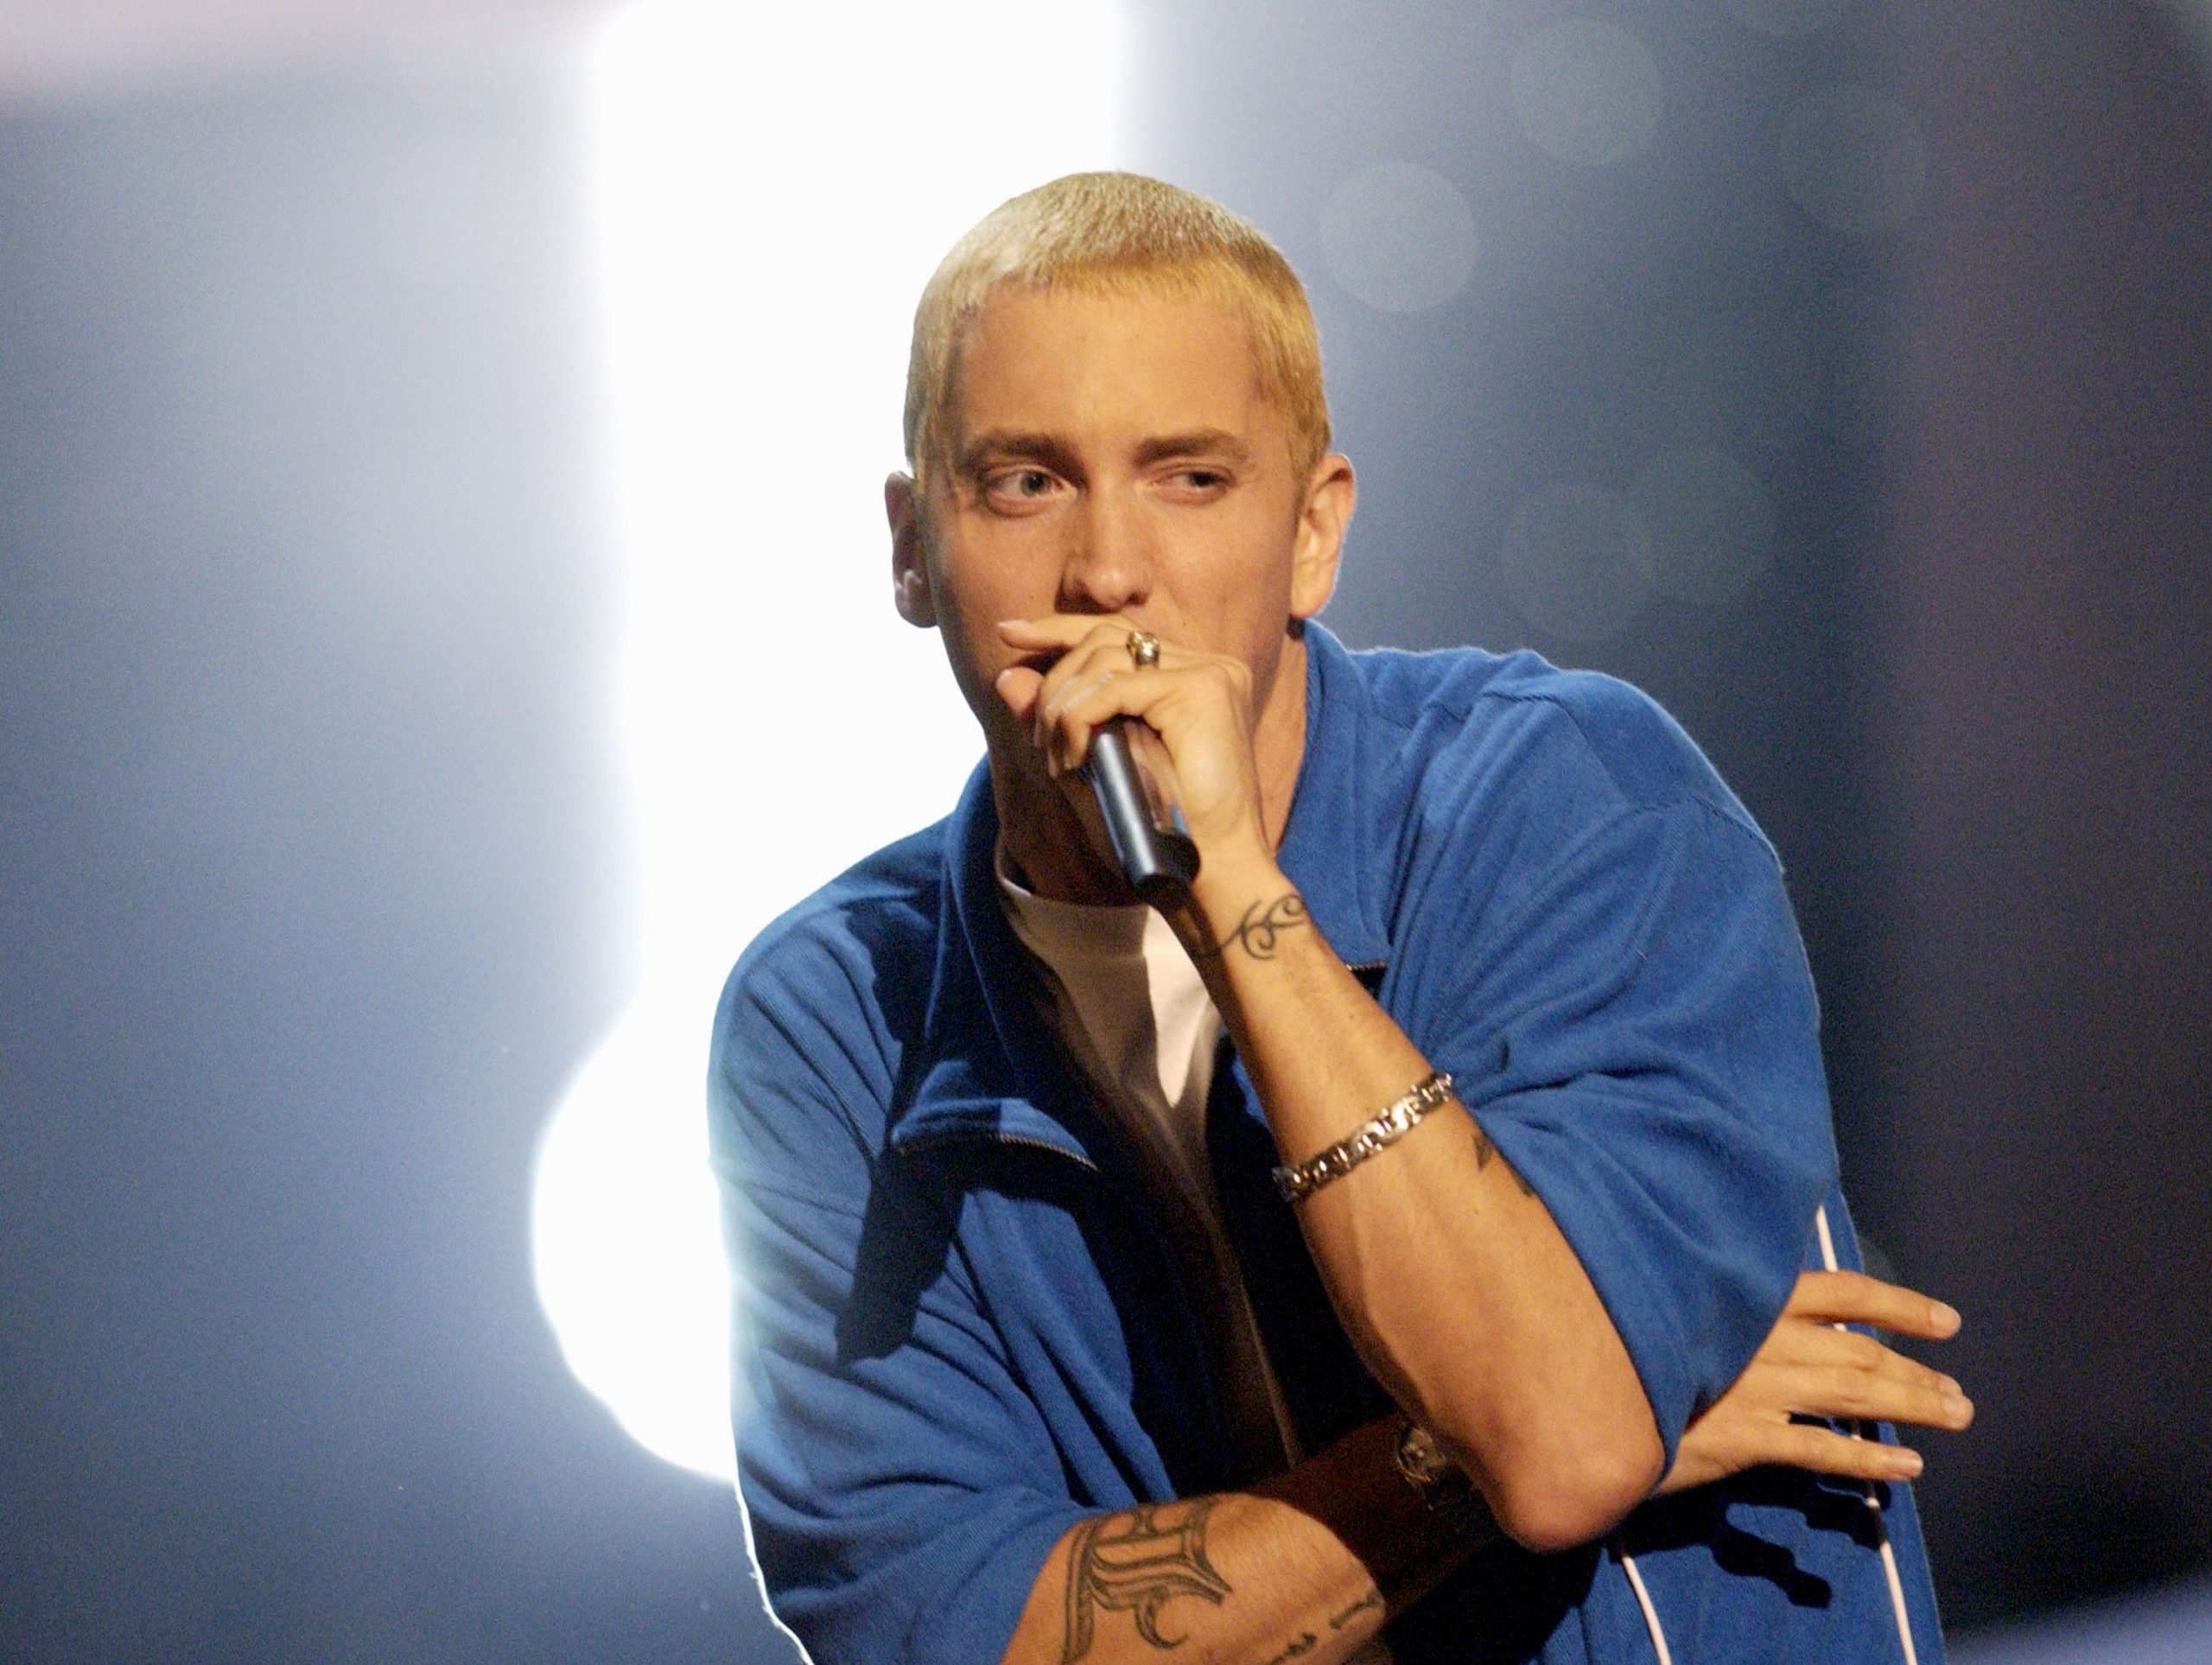 silence Catastrophe eleven Eminem Broke 2 Guinness World Records for Fast Rapping